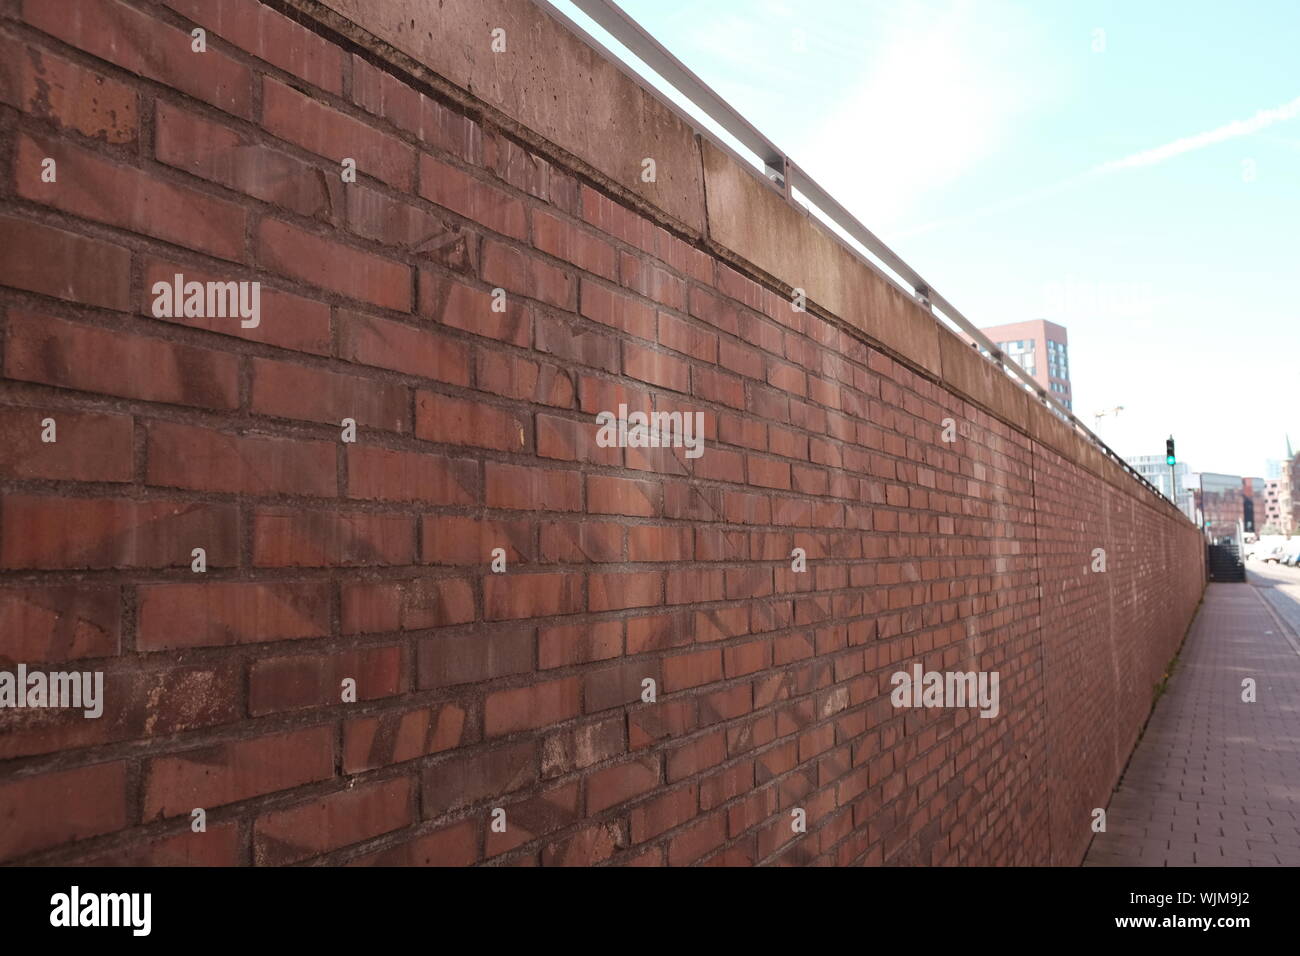 Red Brick Wall In City Stock Photo